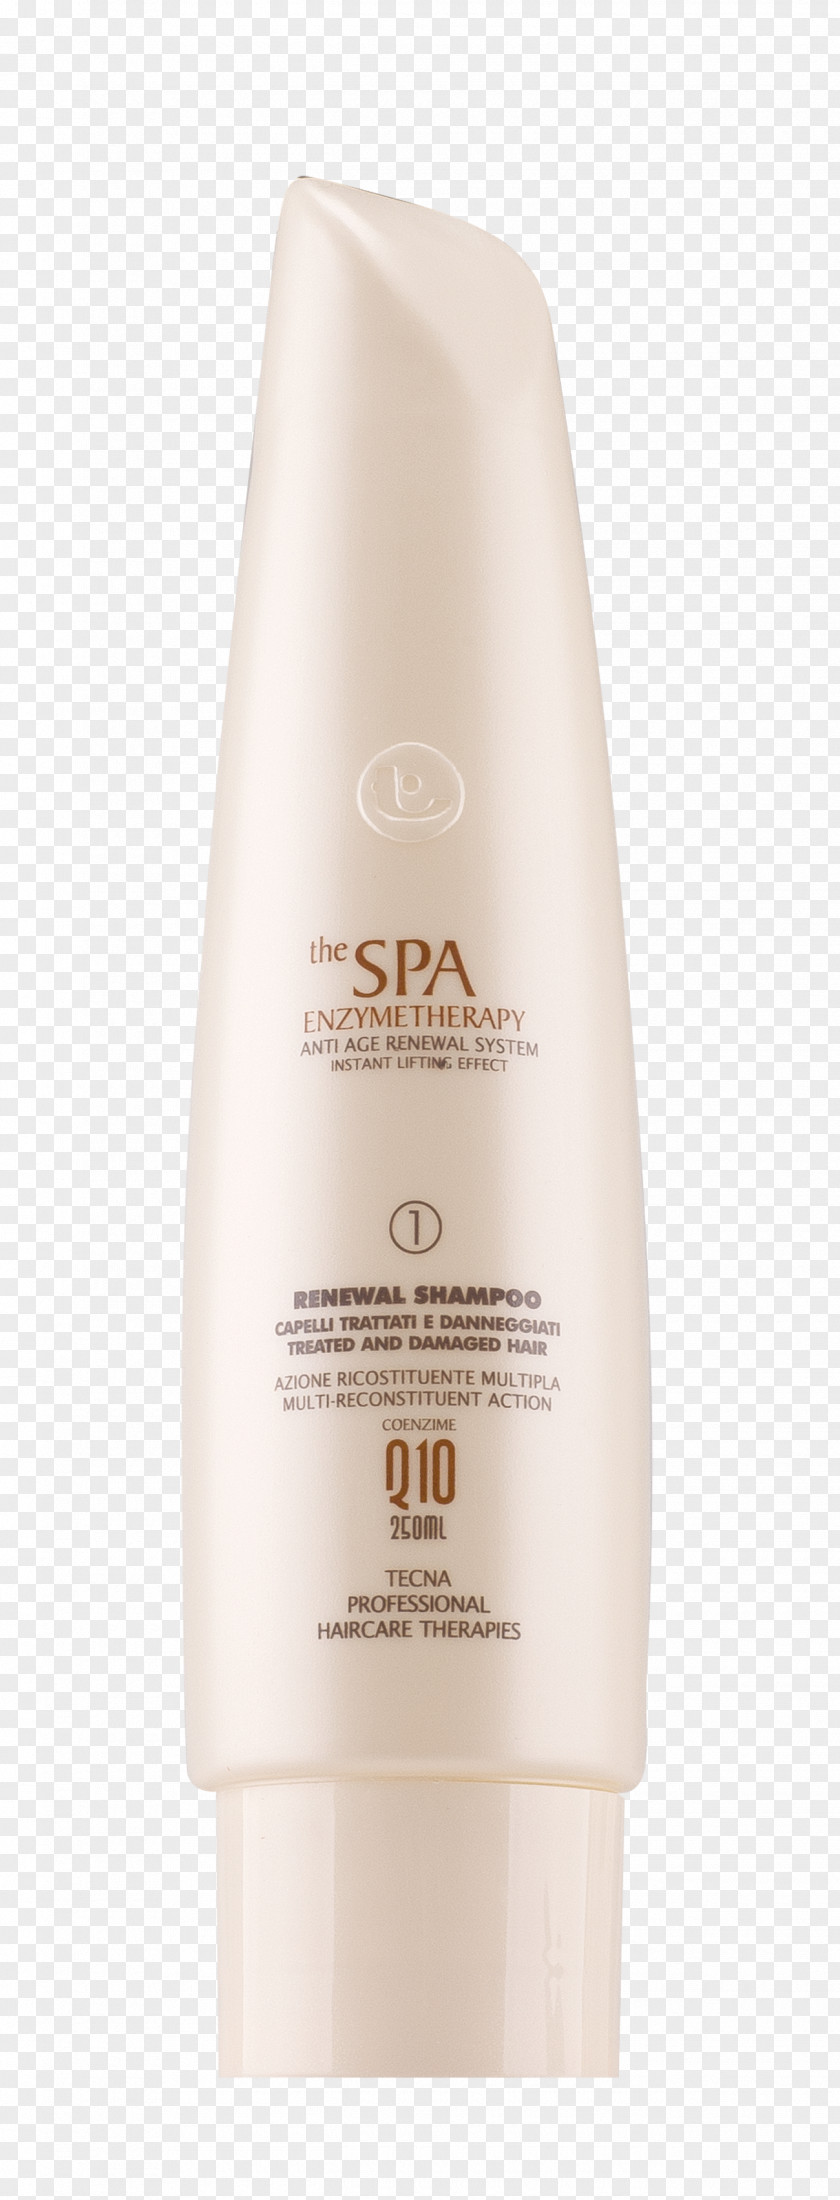 Shampoo Lotion Cream Therapy PNG